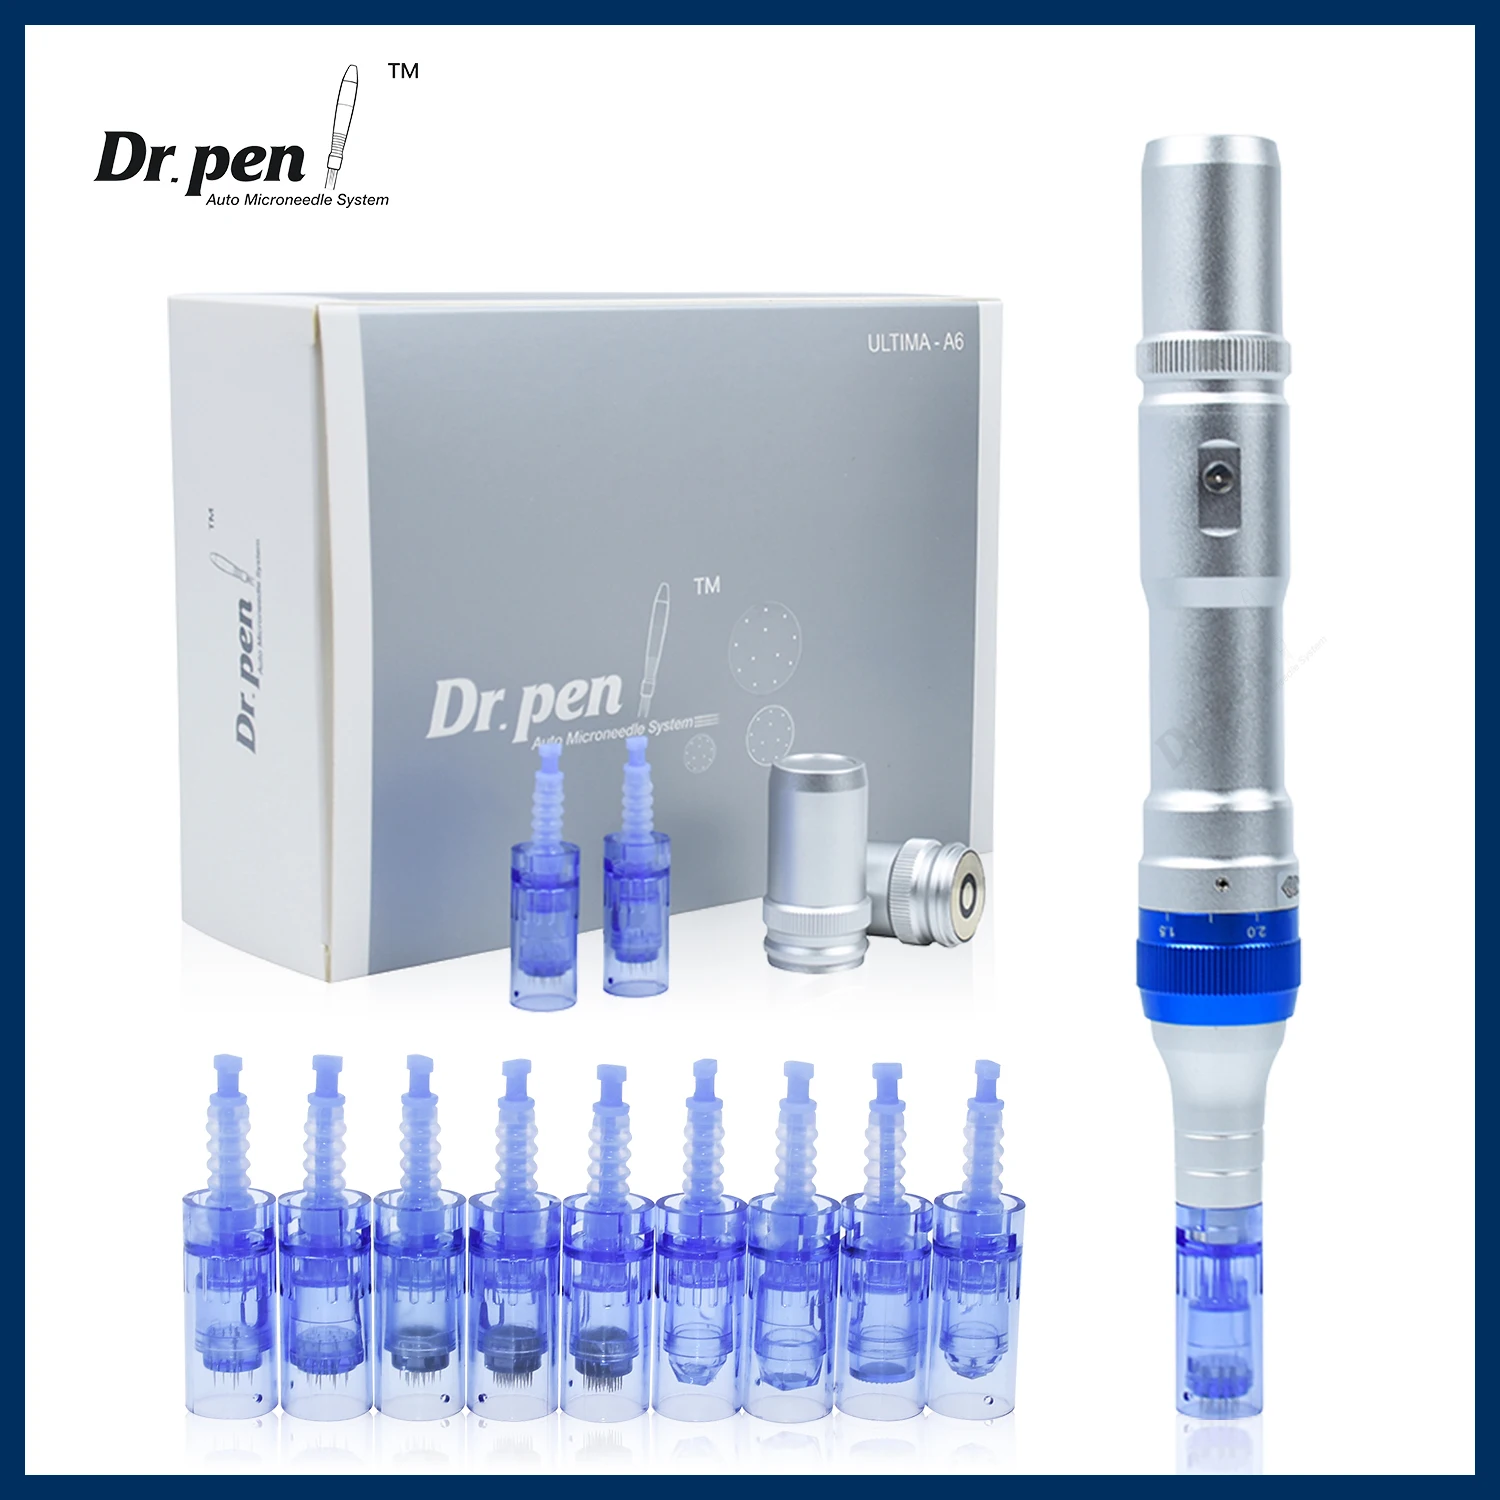 Professional Microneedling Derma Pen Dr Pen Ultima A6 Kits with 12 Pcs Needle Cartridges Home Use Beauty Device Skin Care Tool